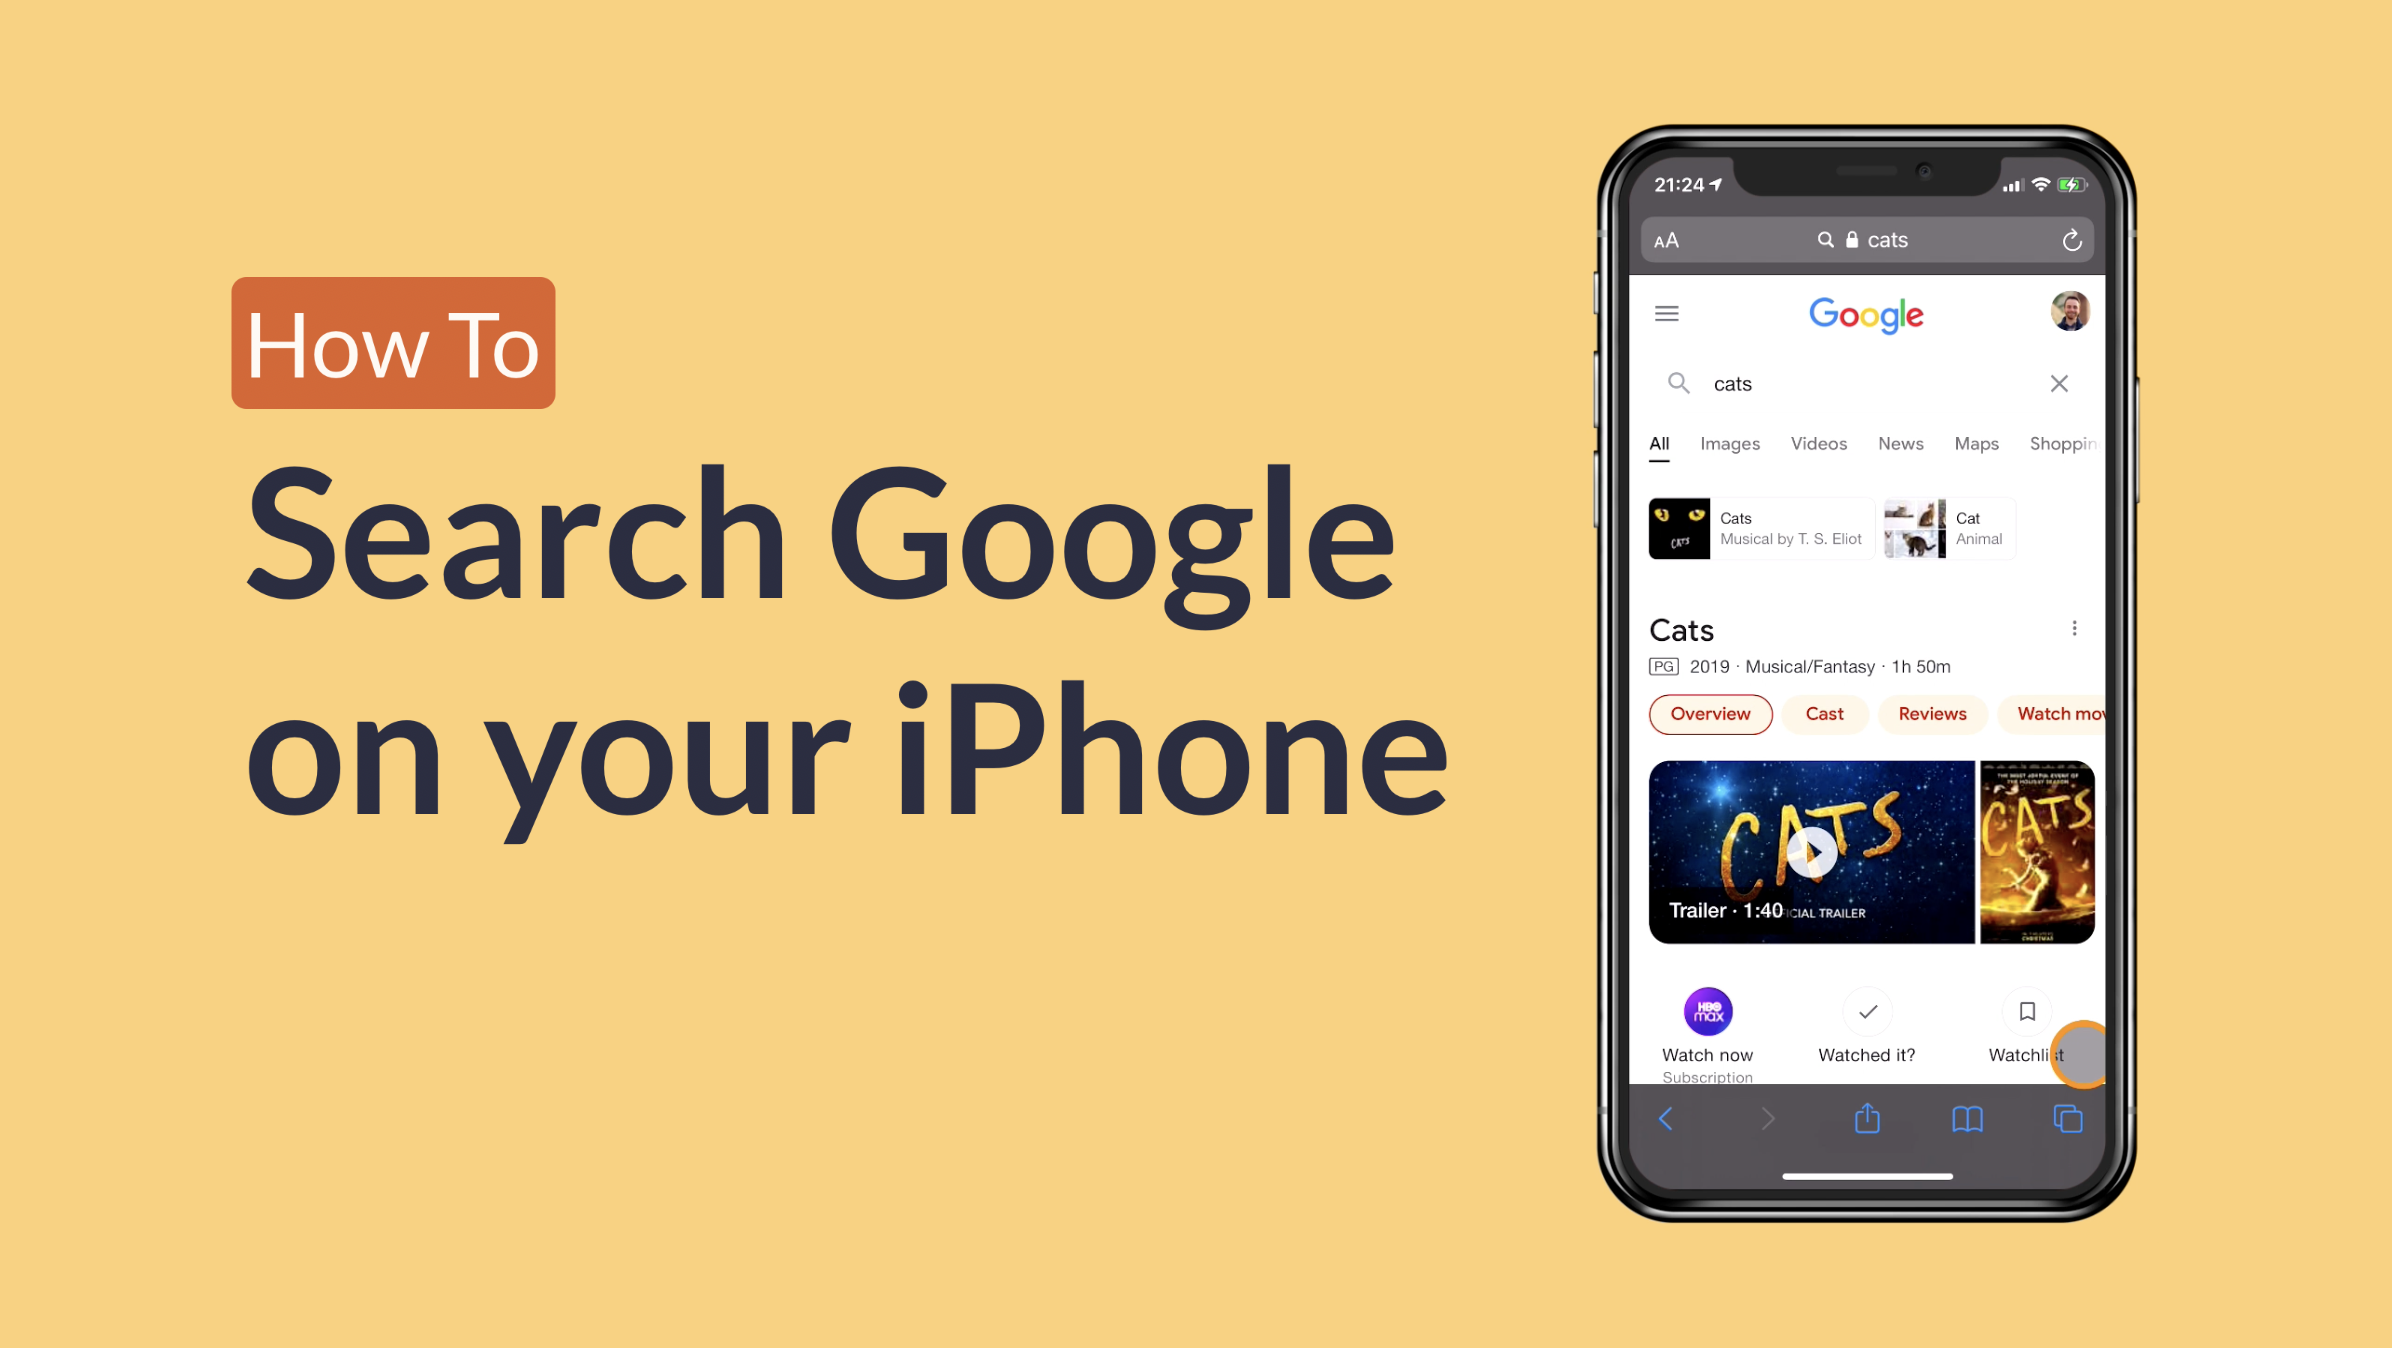 Discover how to search Google on your iPhone